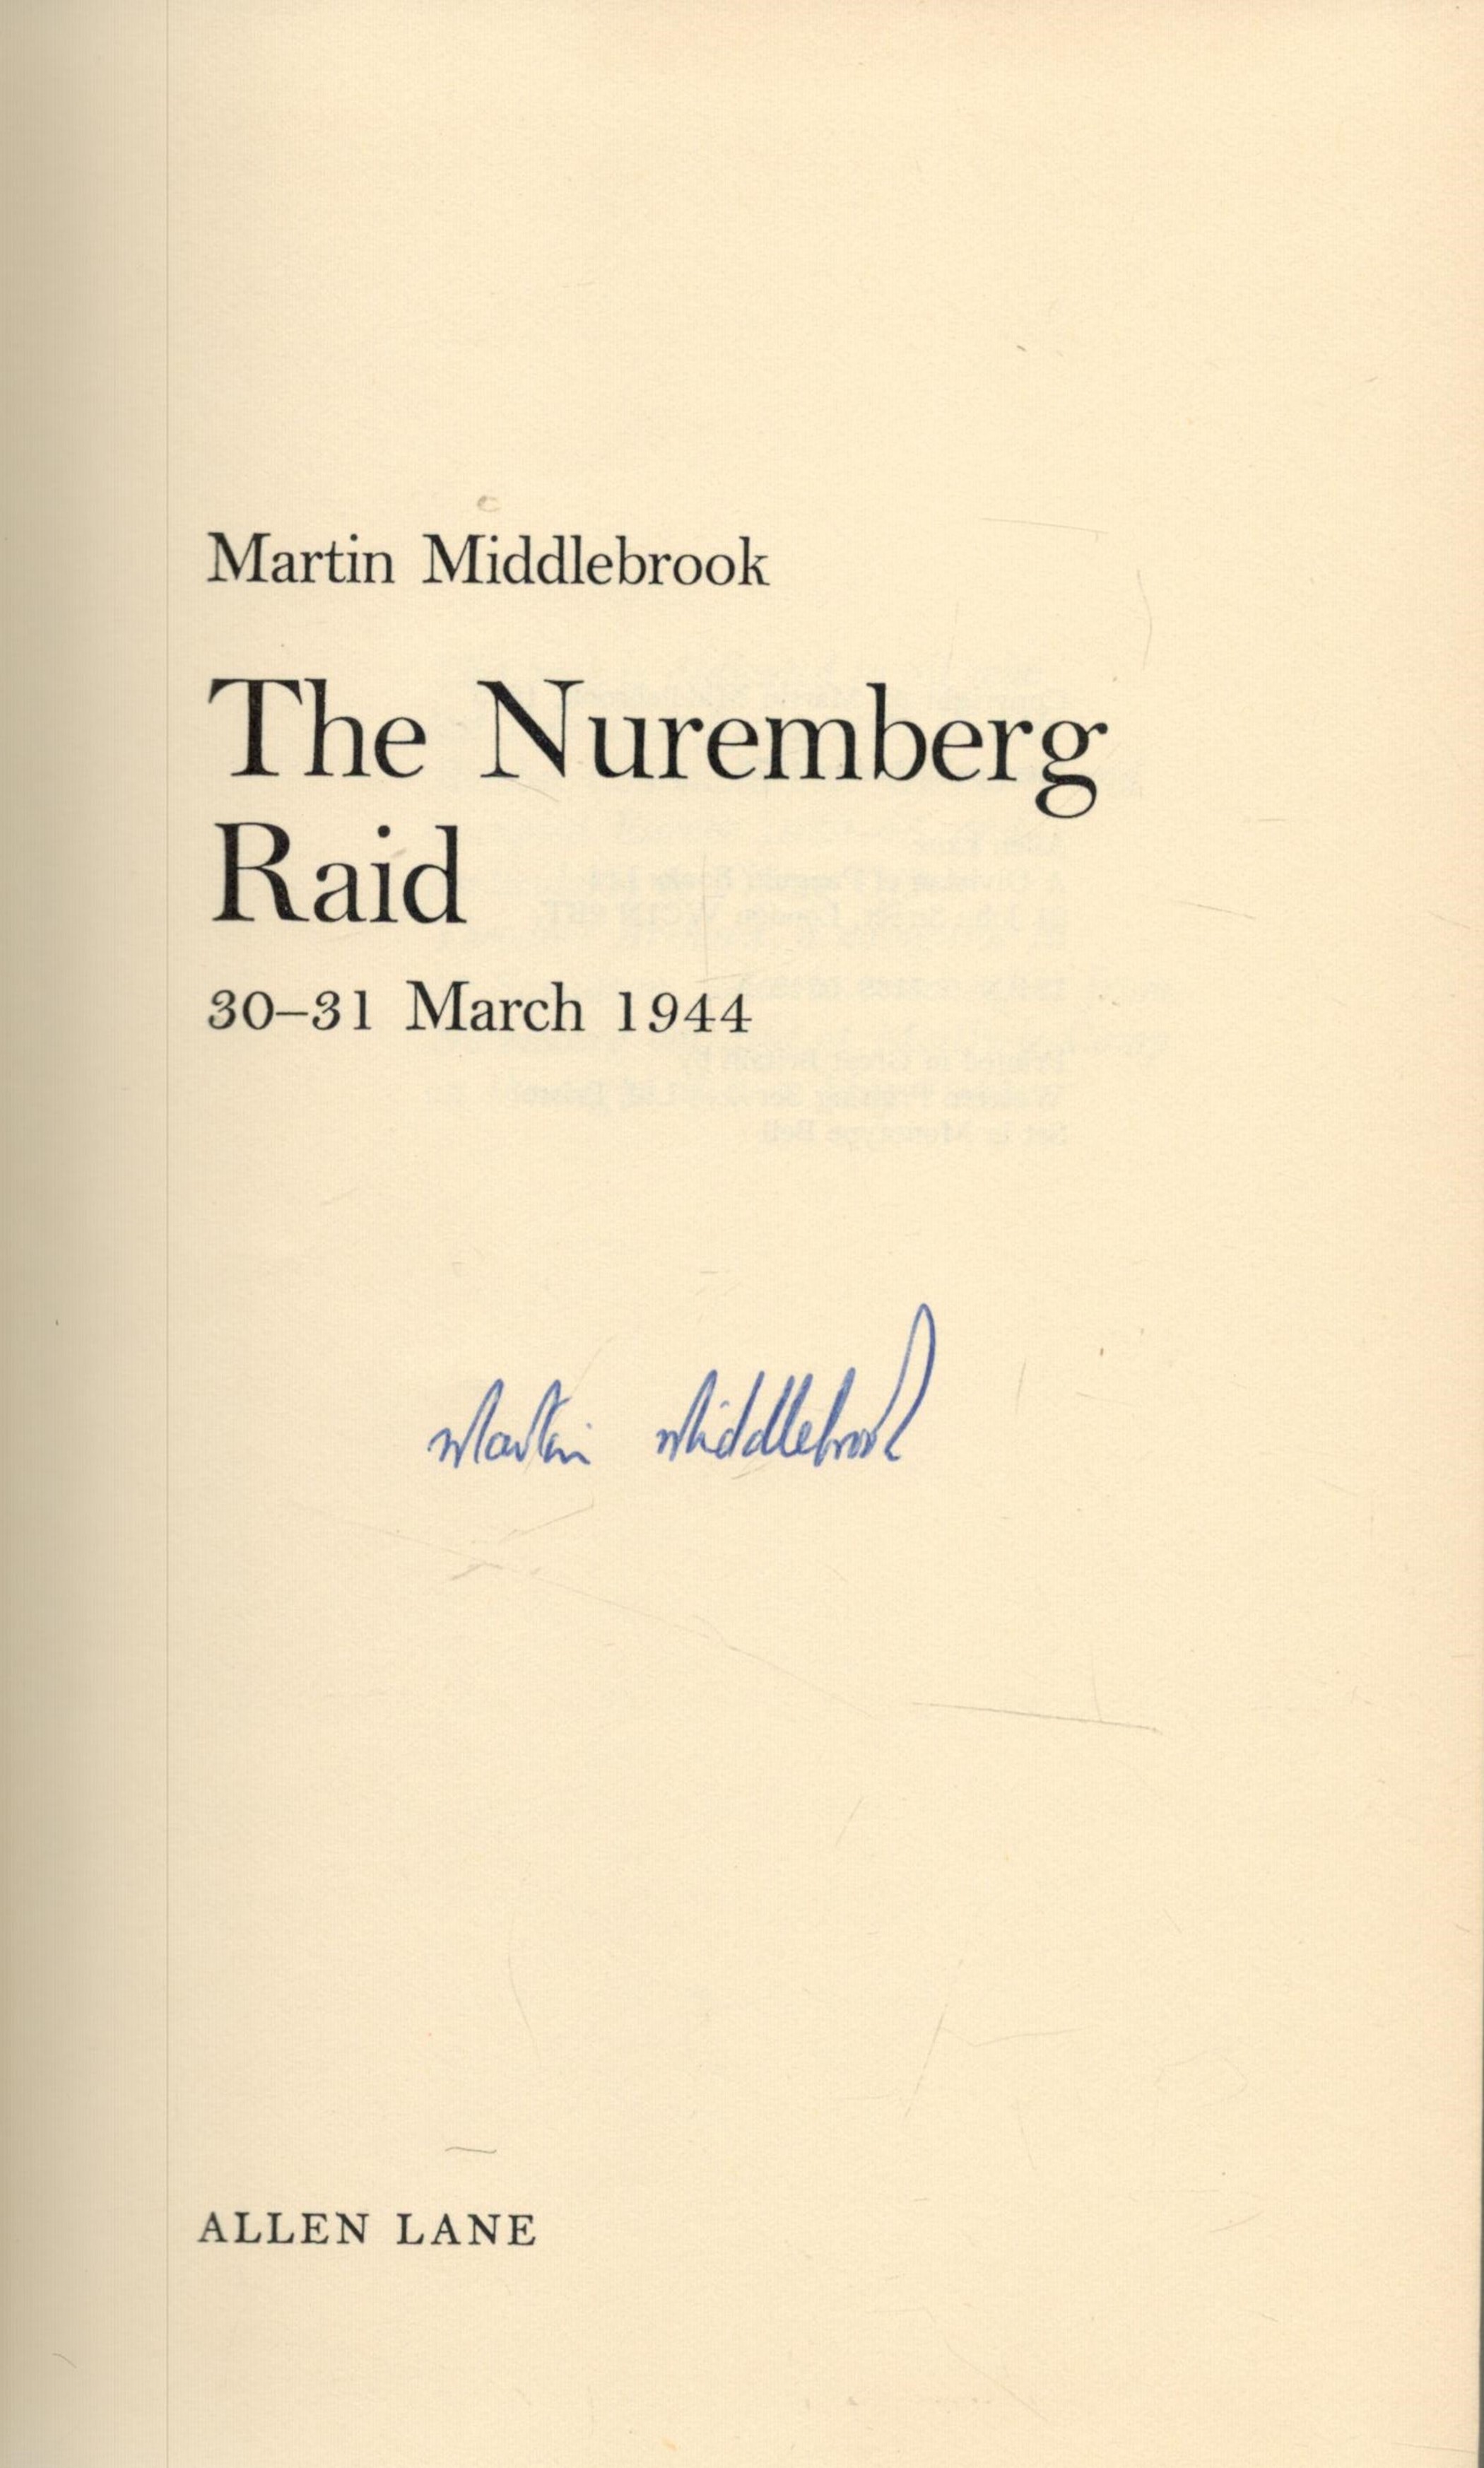 Martin Middlebrook Signed Book The Nuremberg Raid 30 31 March 1944 by Martin Middlebrook 1973 - Image 2 of 3